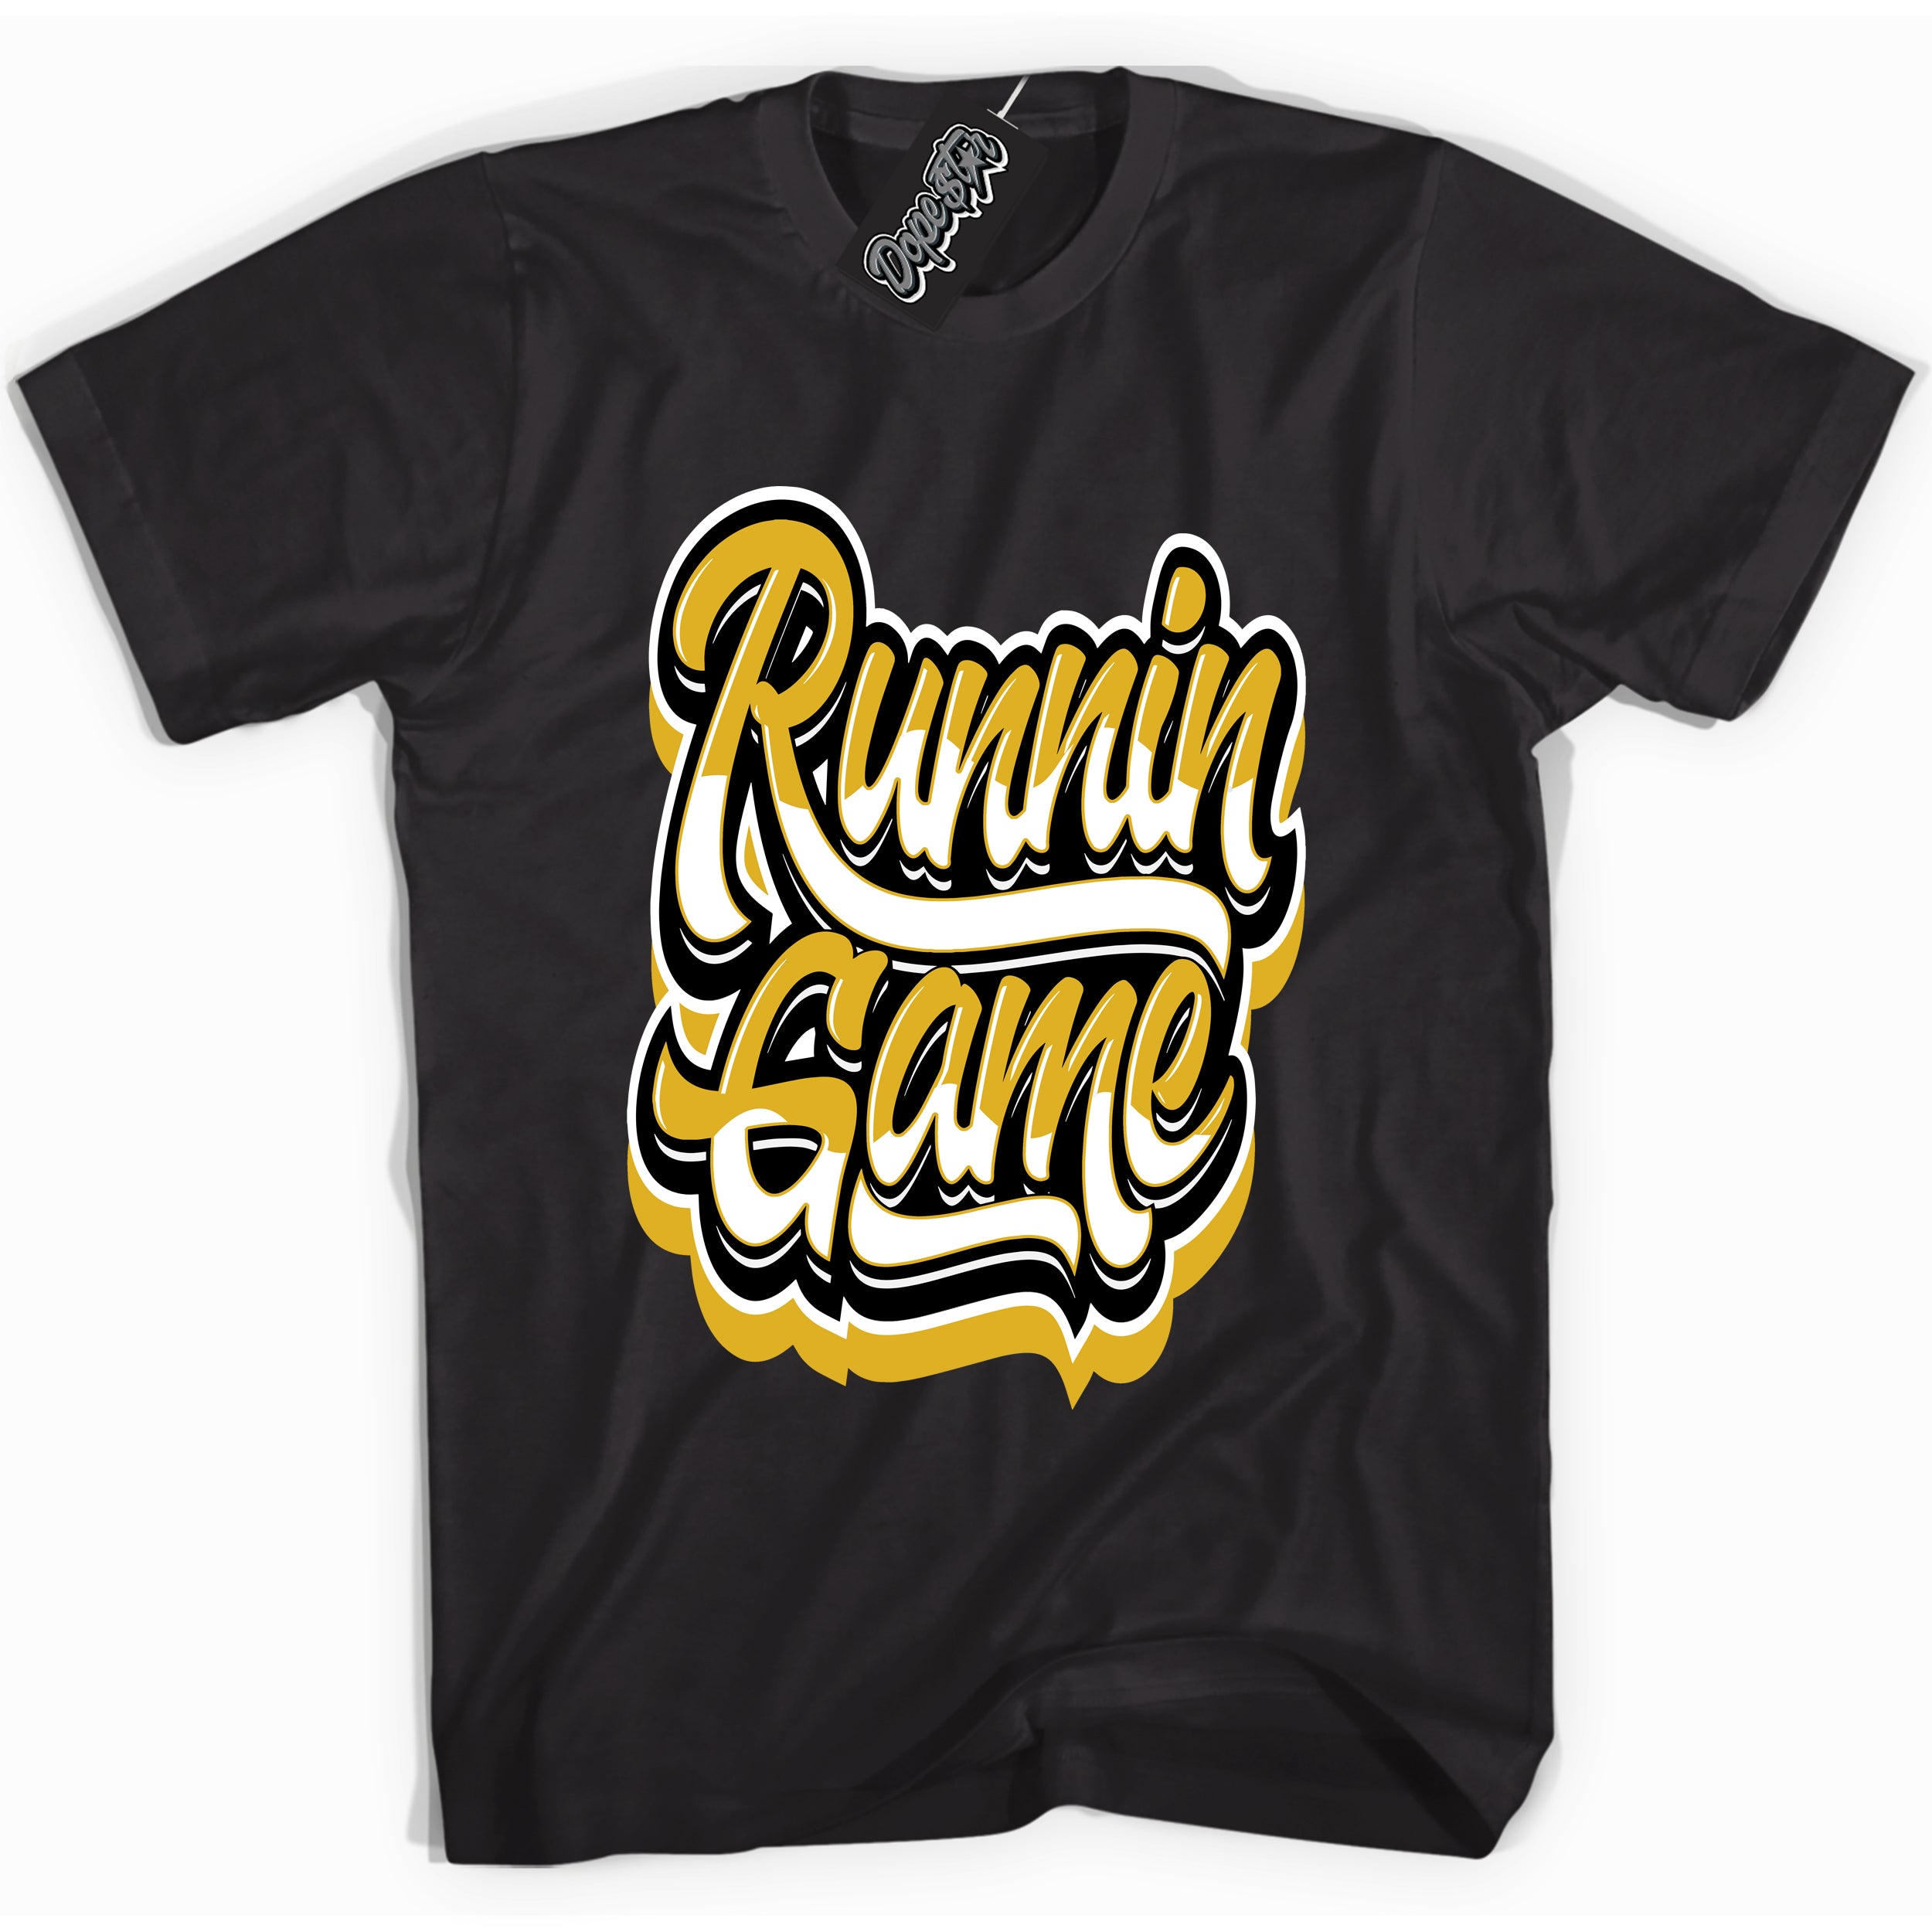 Cool Black Shirt with “ Running Game ” design that perfectly matches Yellow Ochre 6s Sneakers.